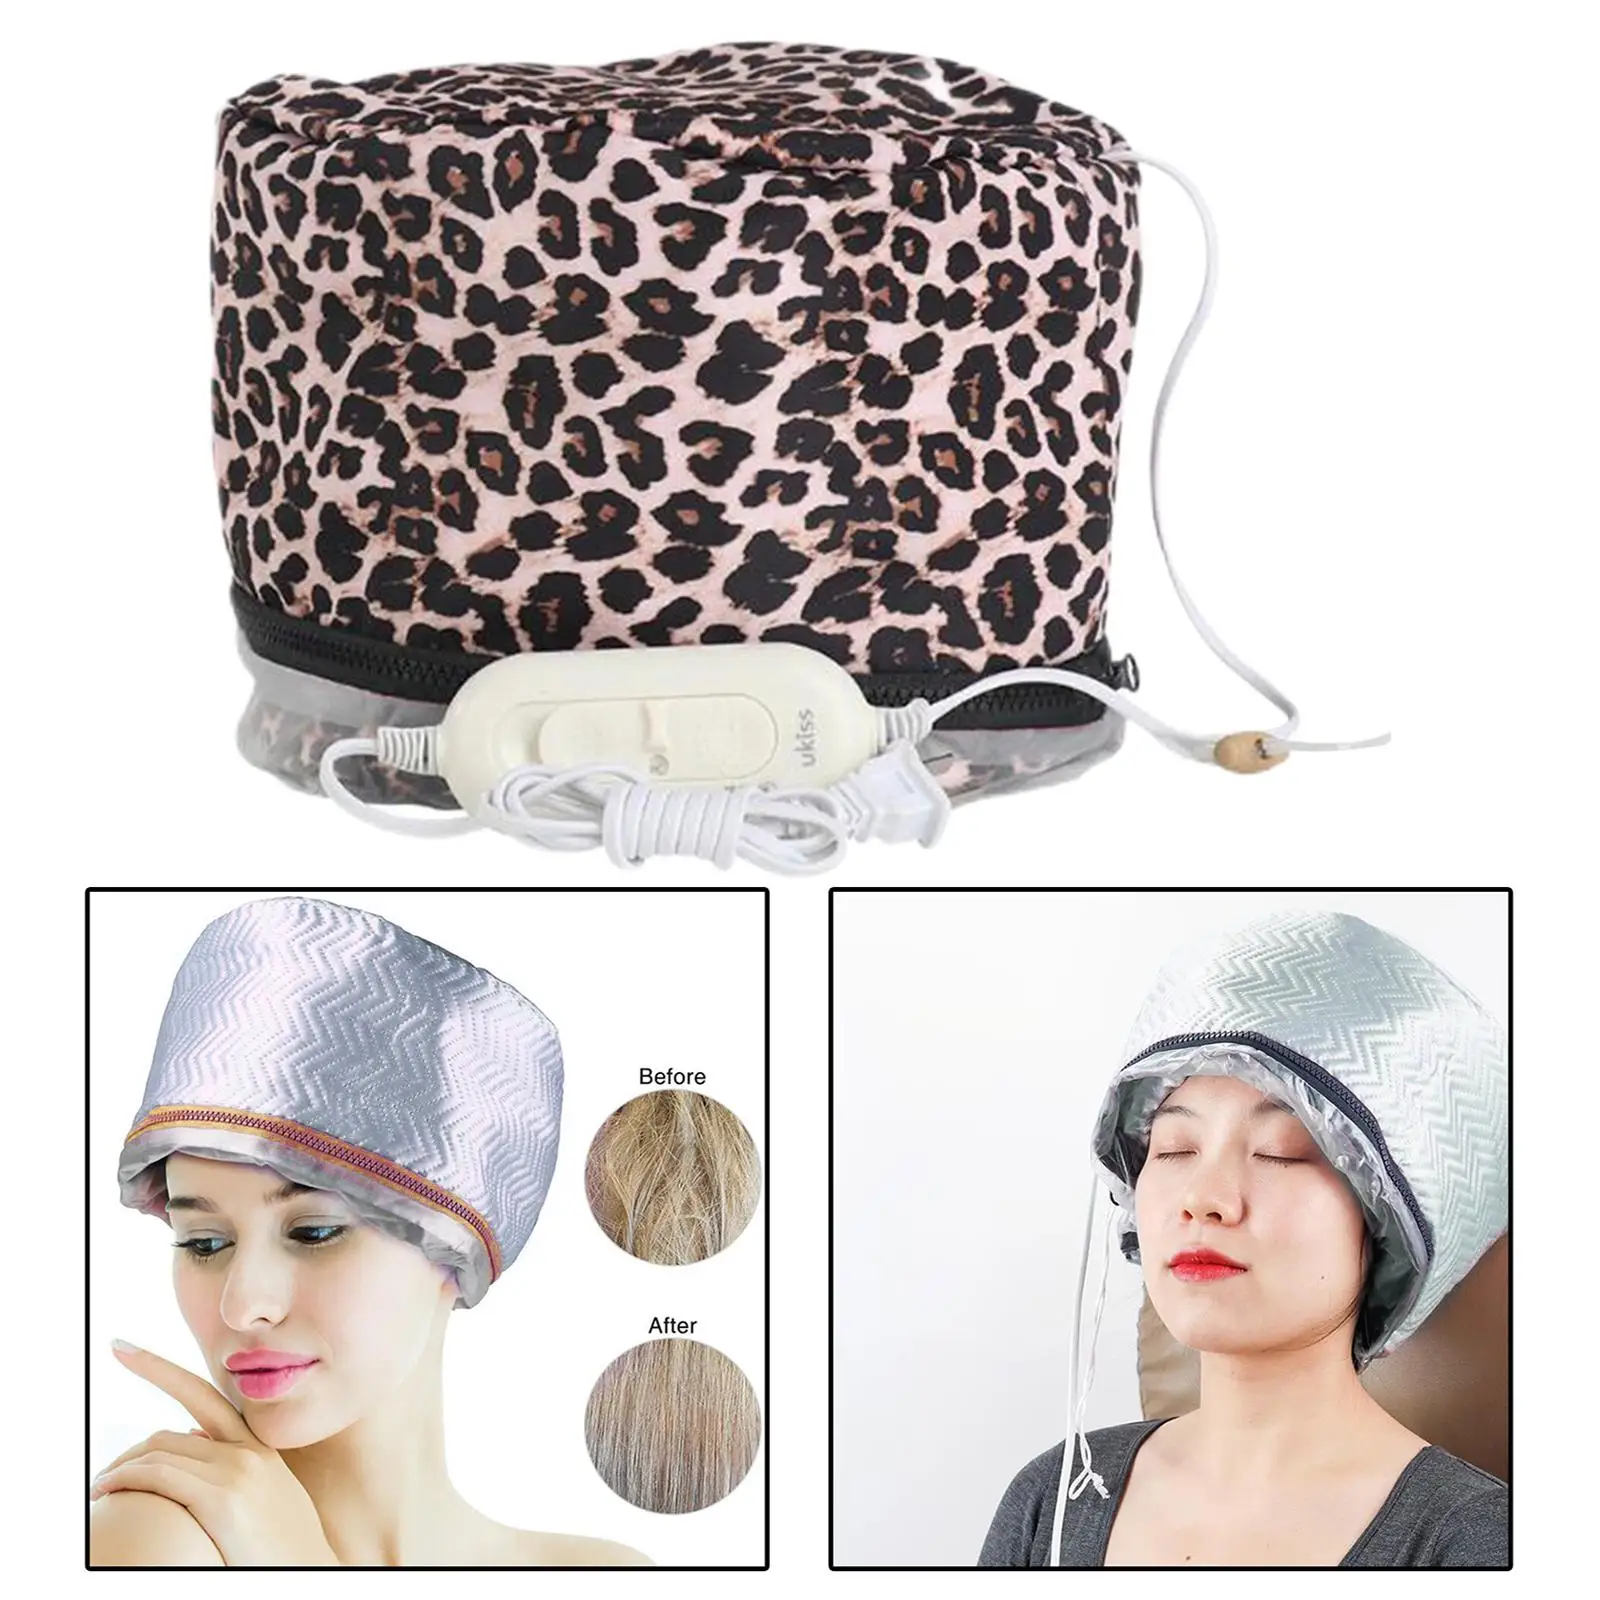 Hair Care Steamer Hat Deep Conditioner 110V Thermal Hair Caps 3 Modes Temperature Control Leopard Print Family Personal Care US